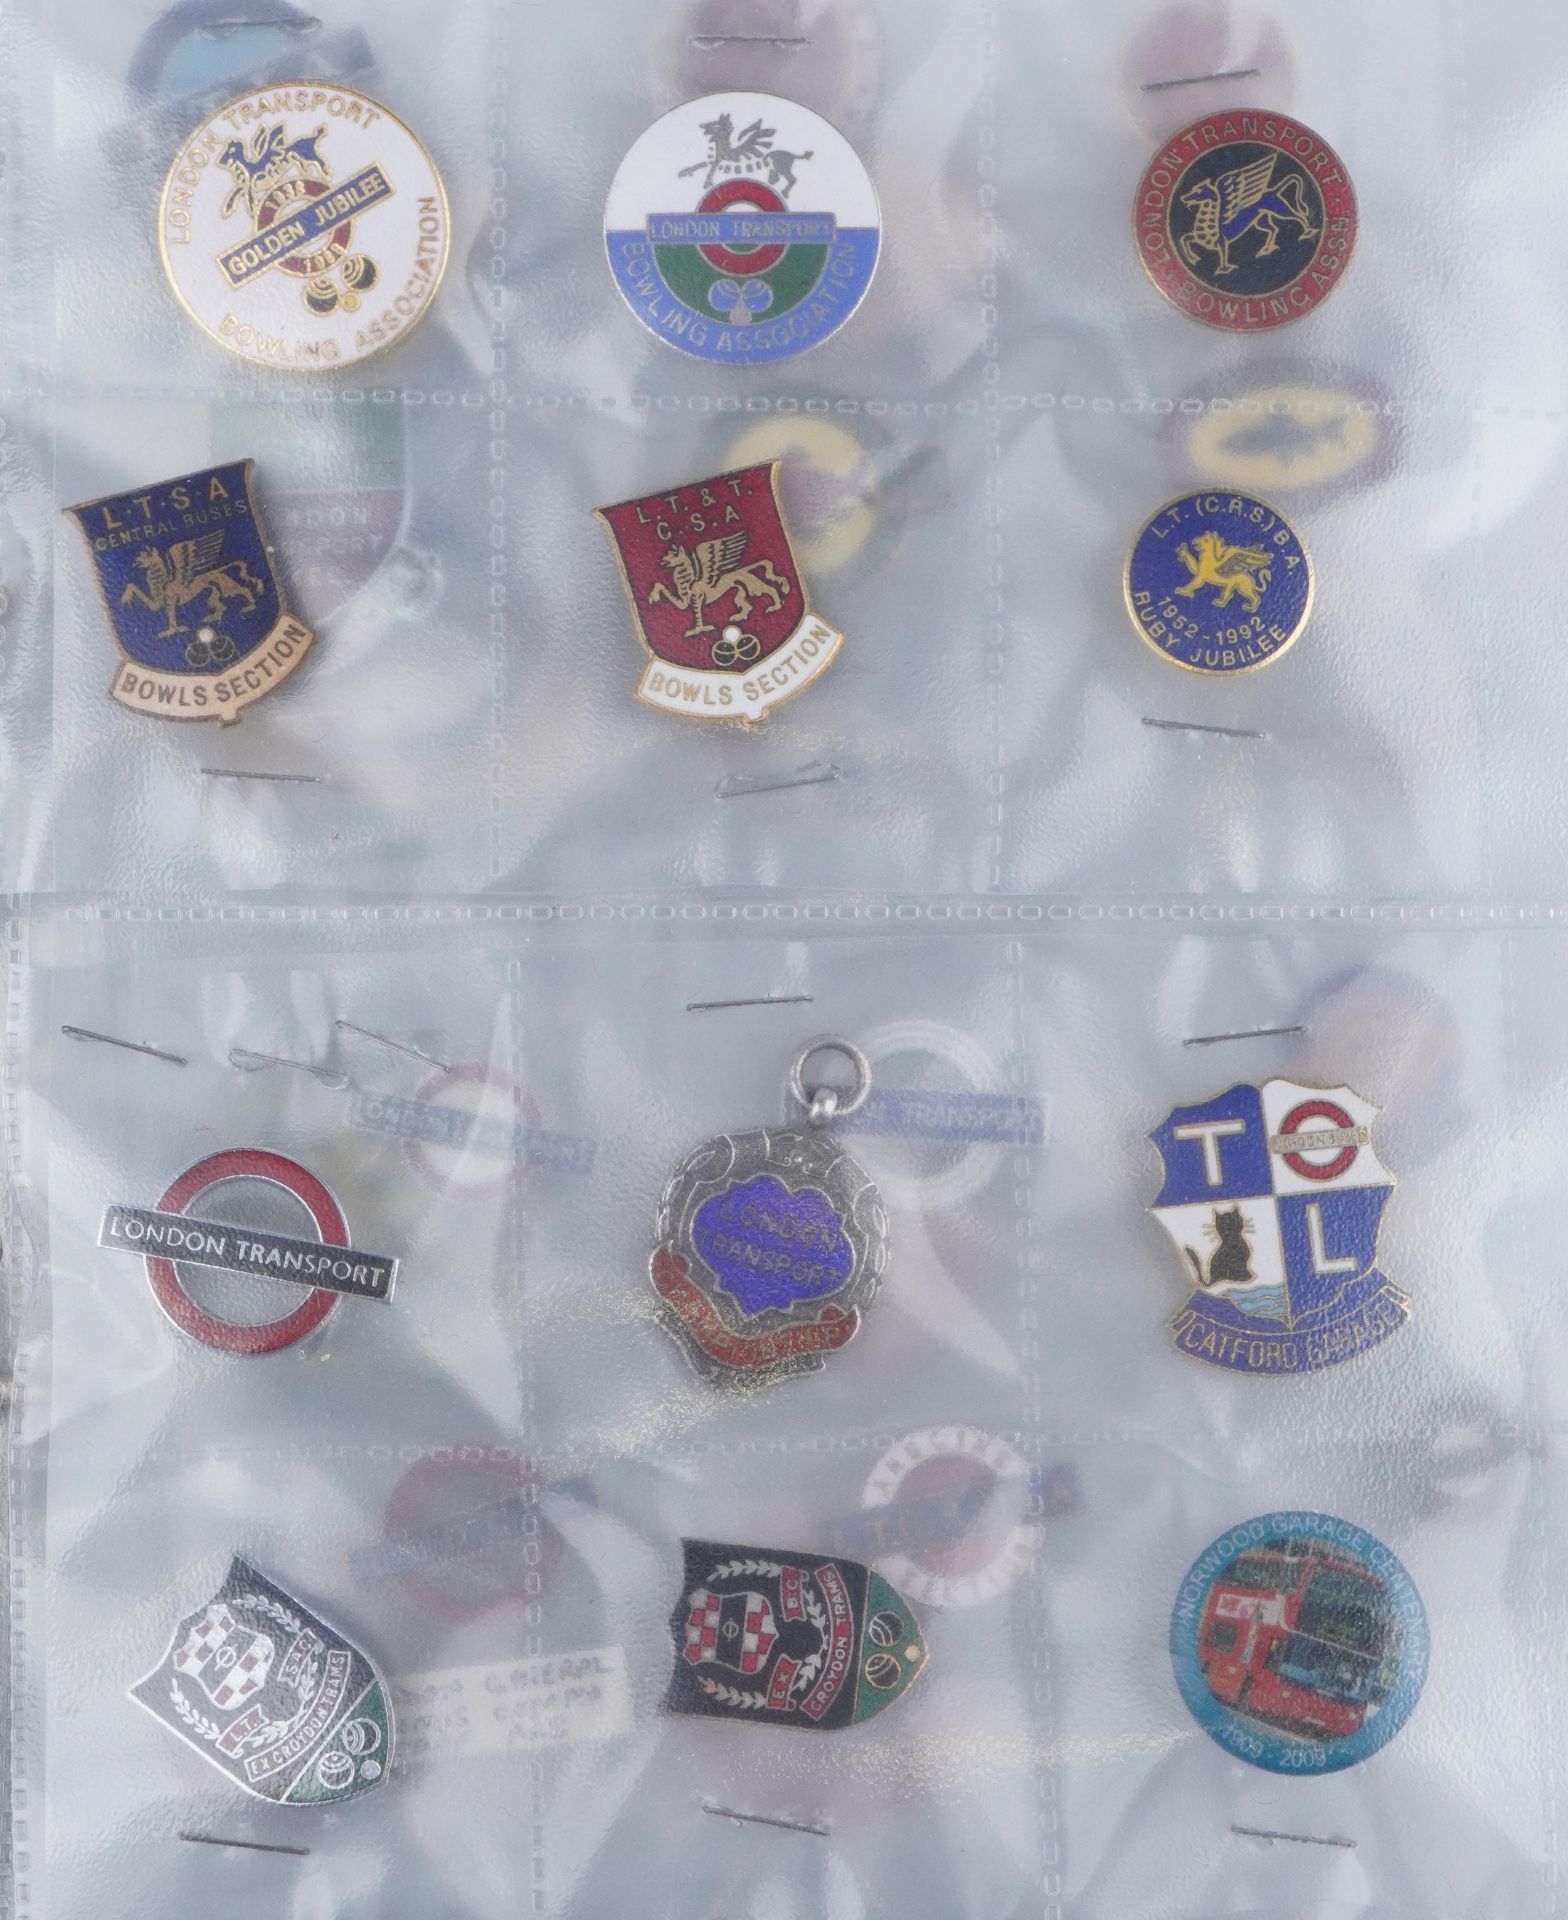 Large collection of automobilia and sporting interest badges and jewels, some arranged in an album